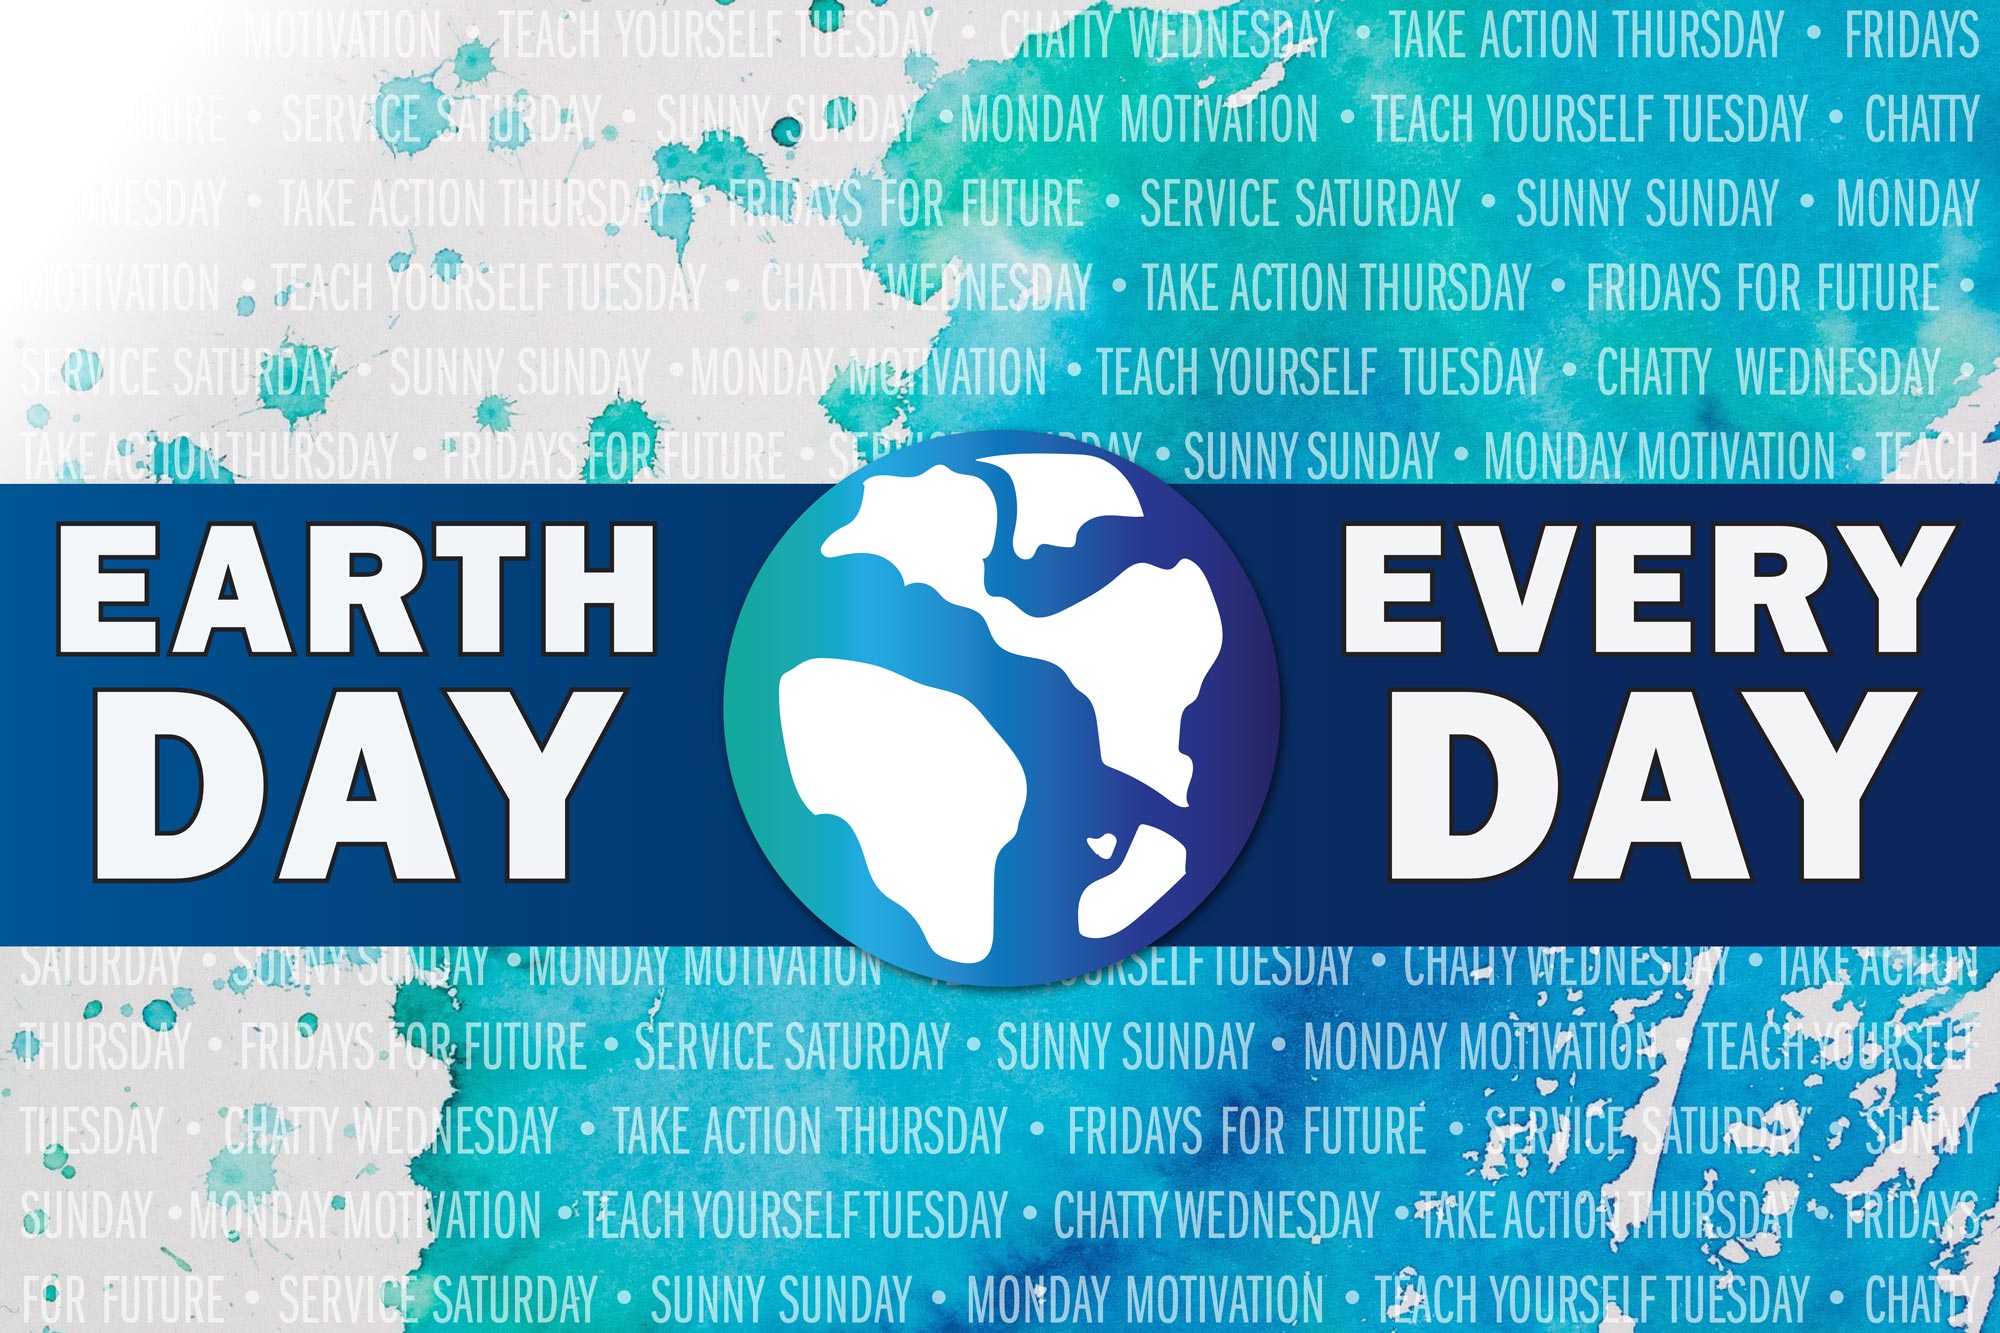 Earth Week Goes Virtual With ‘Earth Day Every Day’ Campaign UVA Today